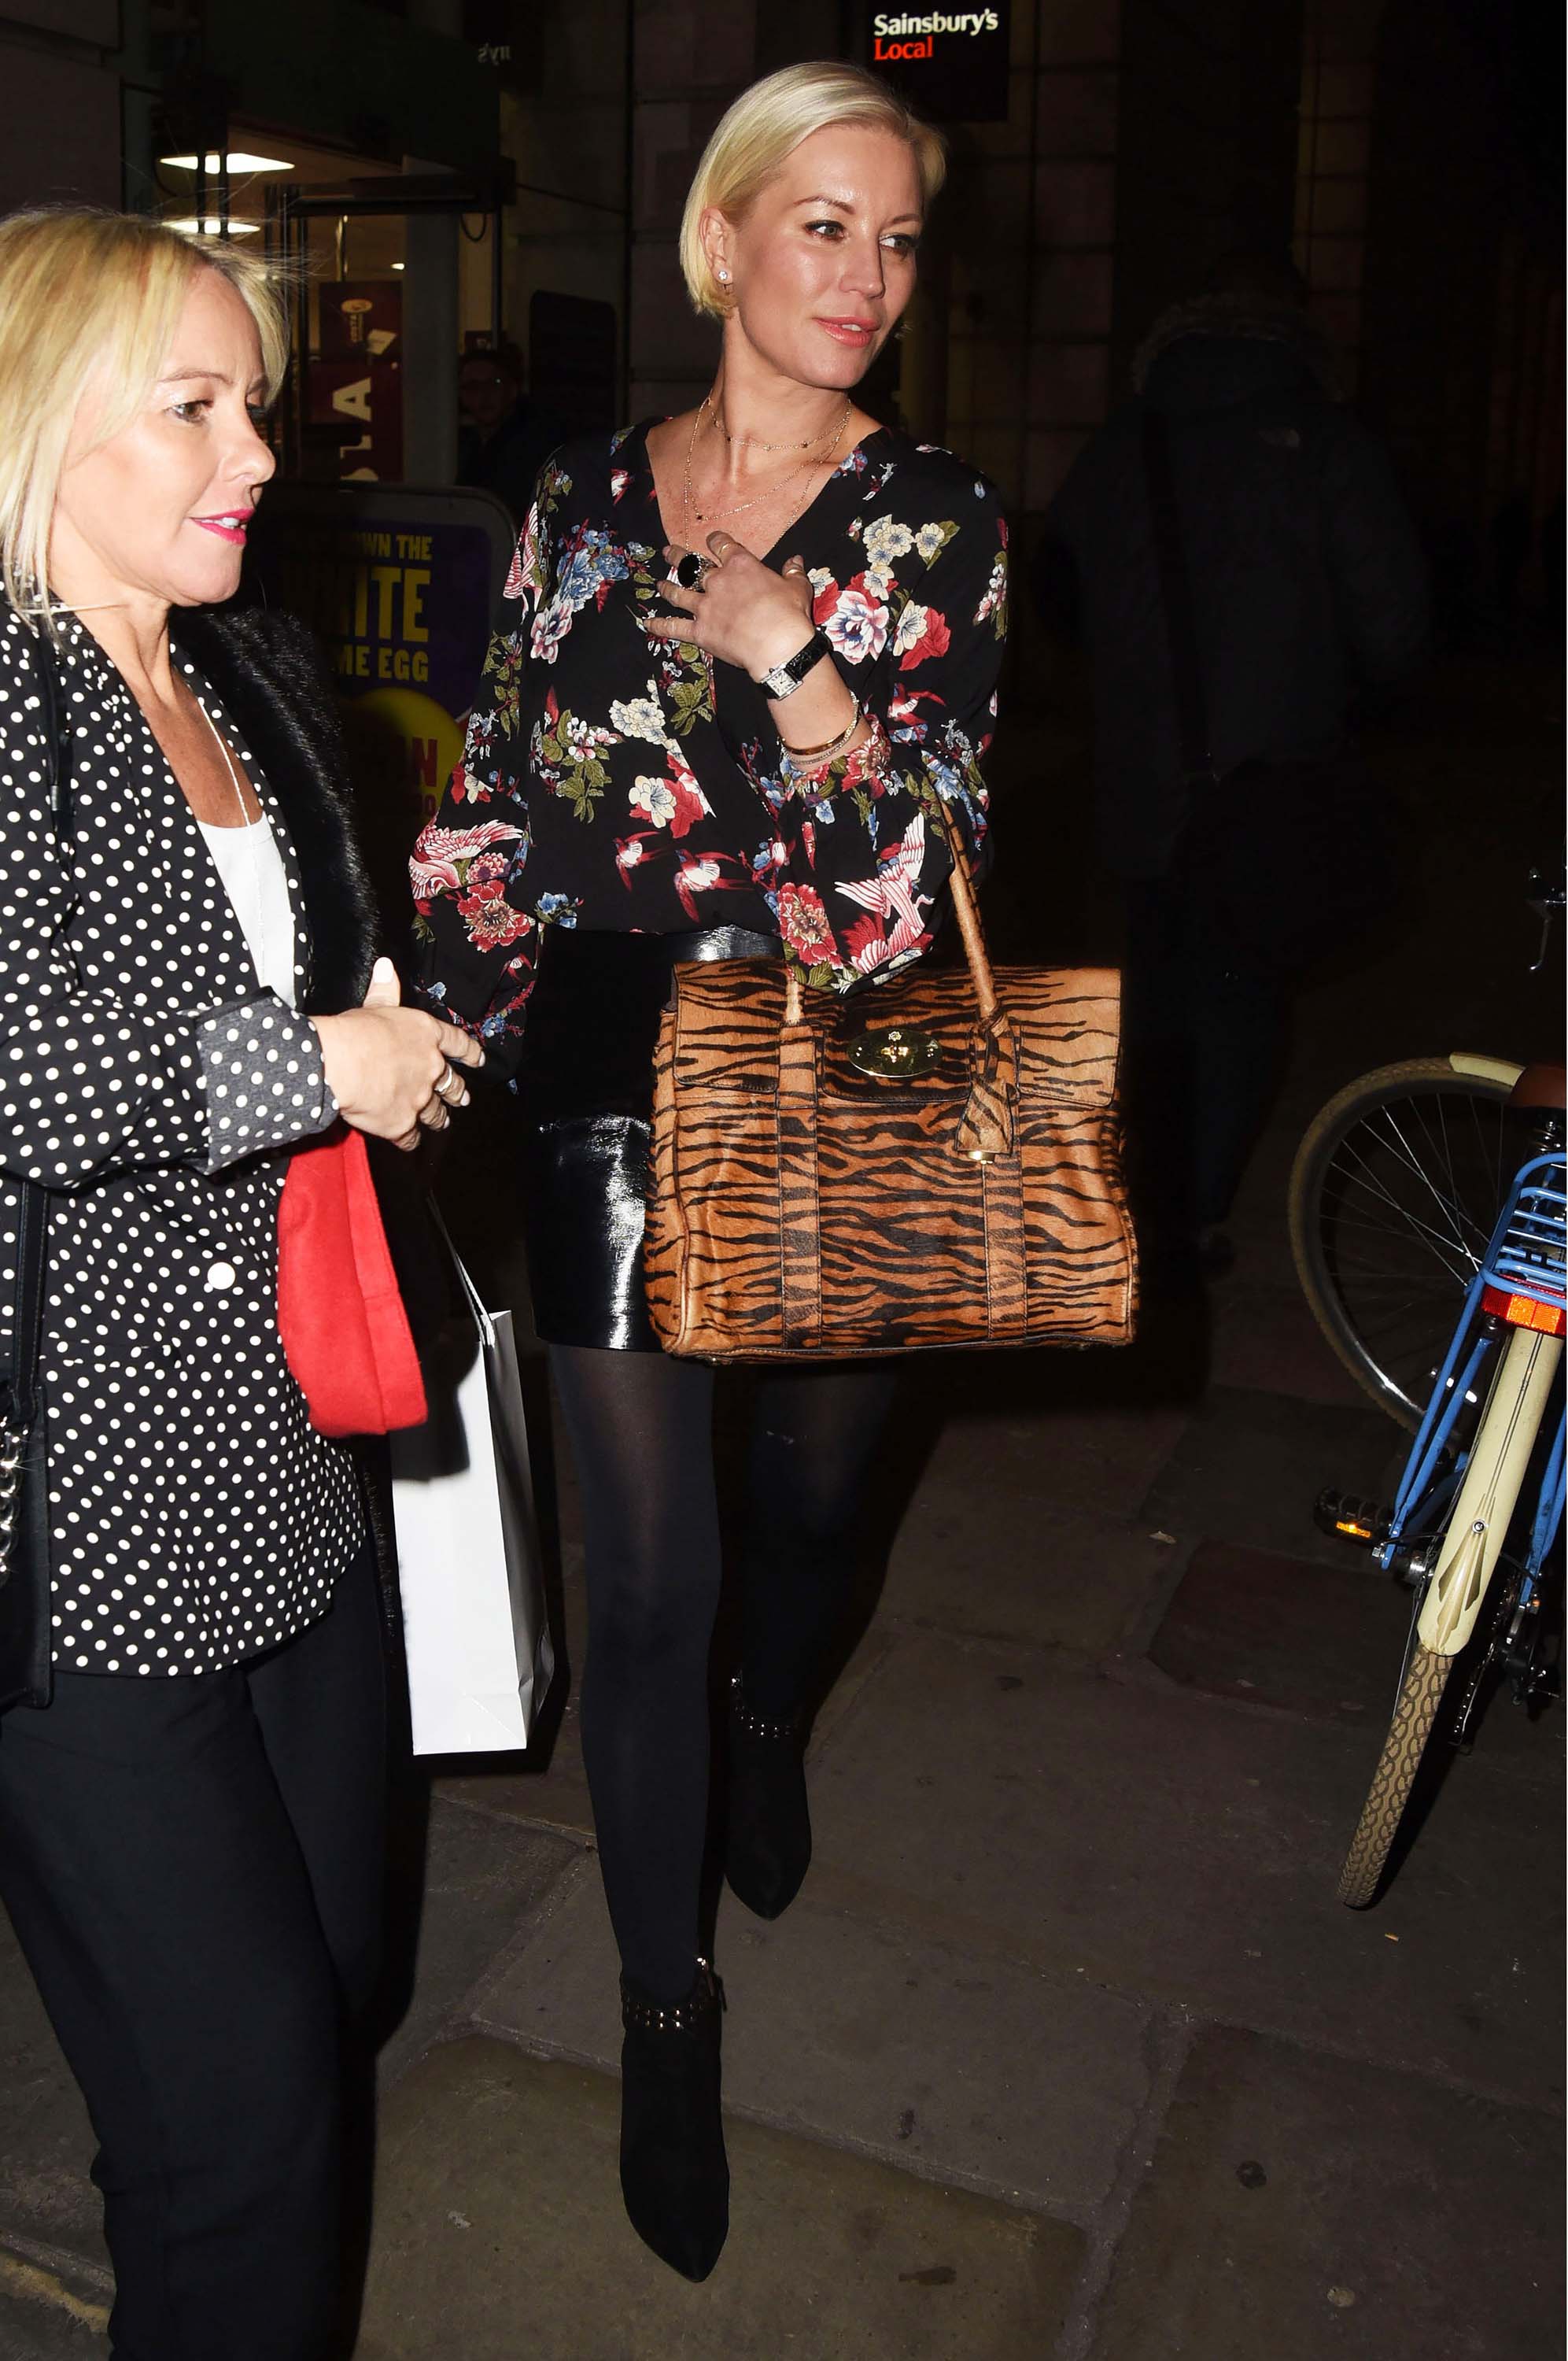 Denise Van Outen arriving at Hello Love Robinsons event